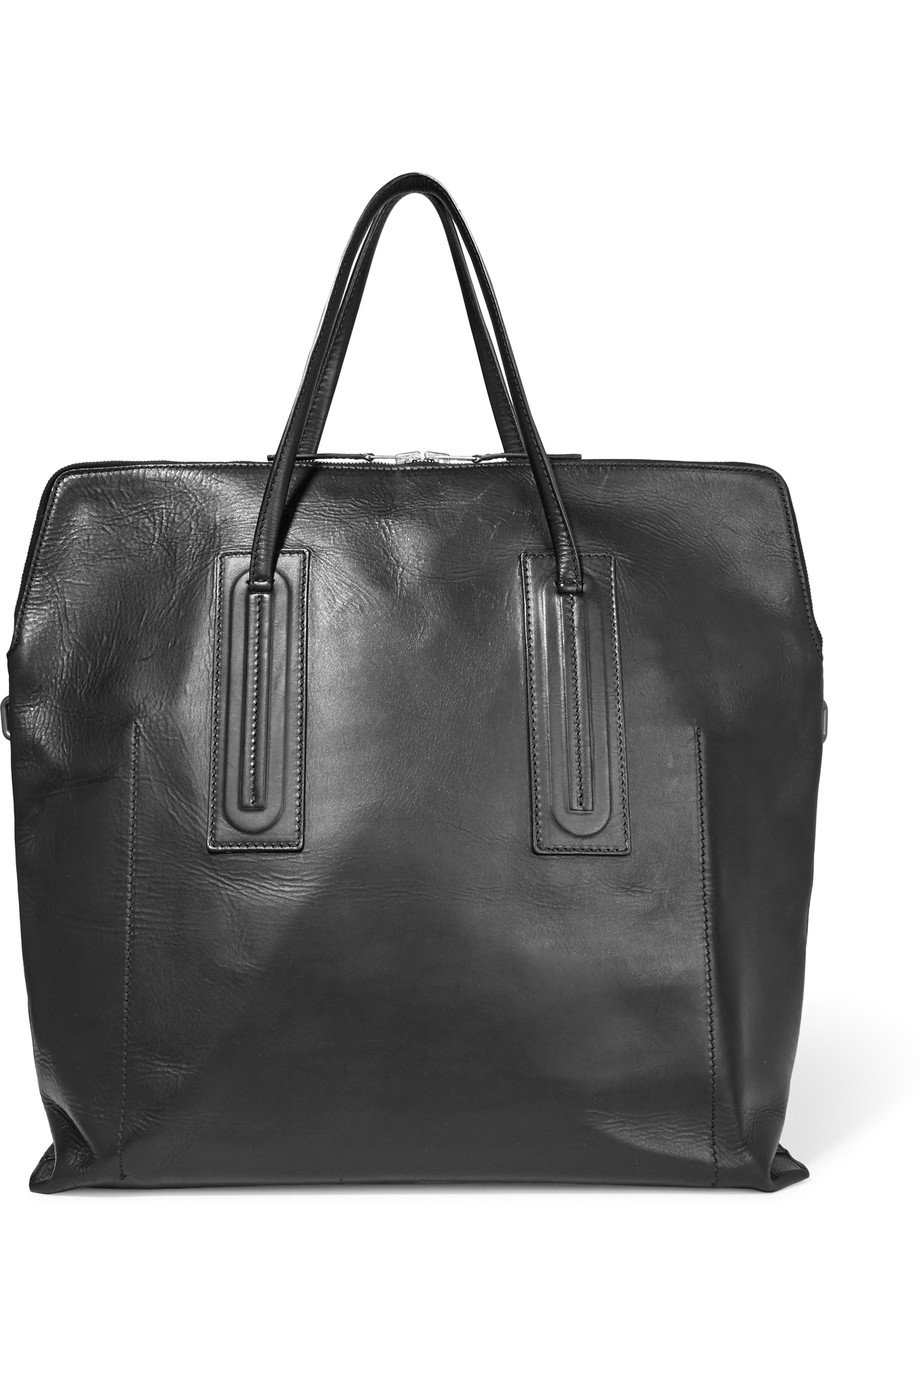 Rick Owens Leather Tote | ModeSens